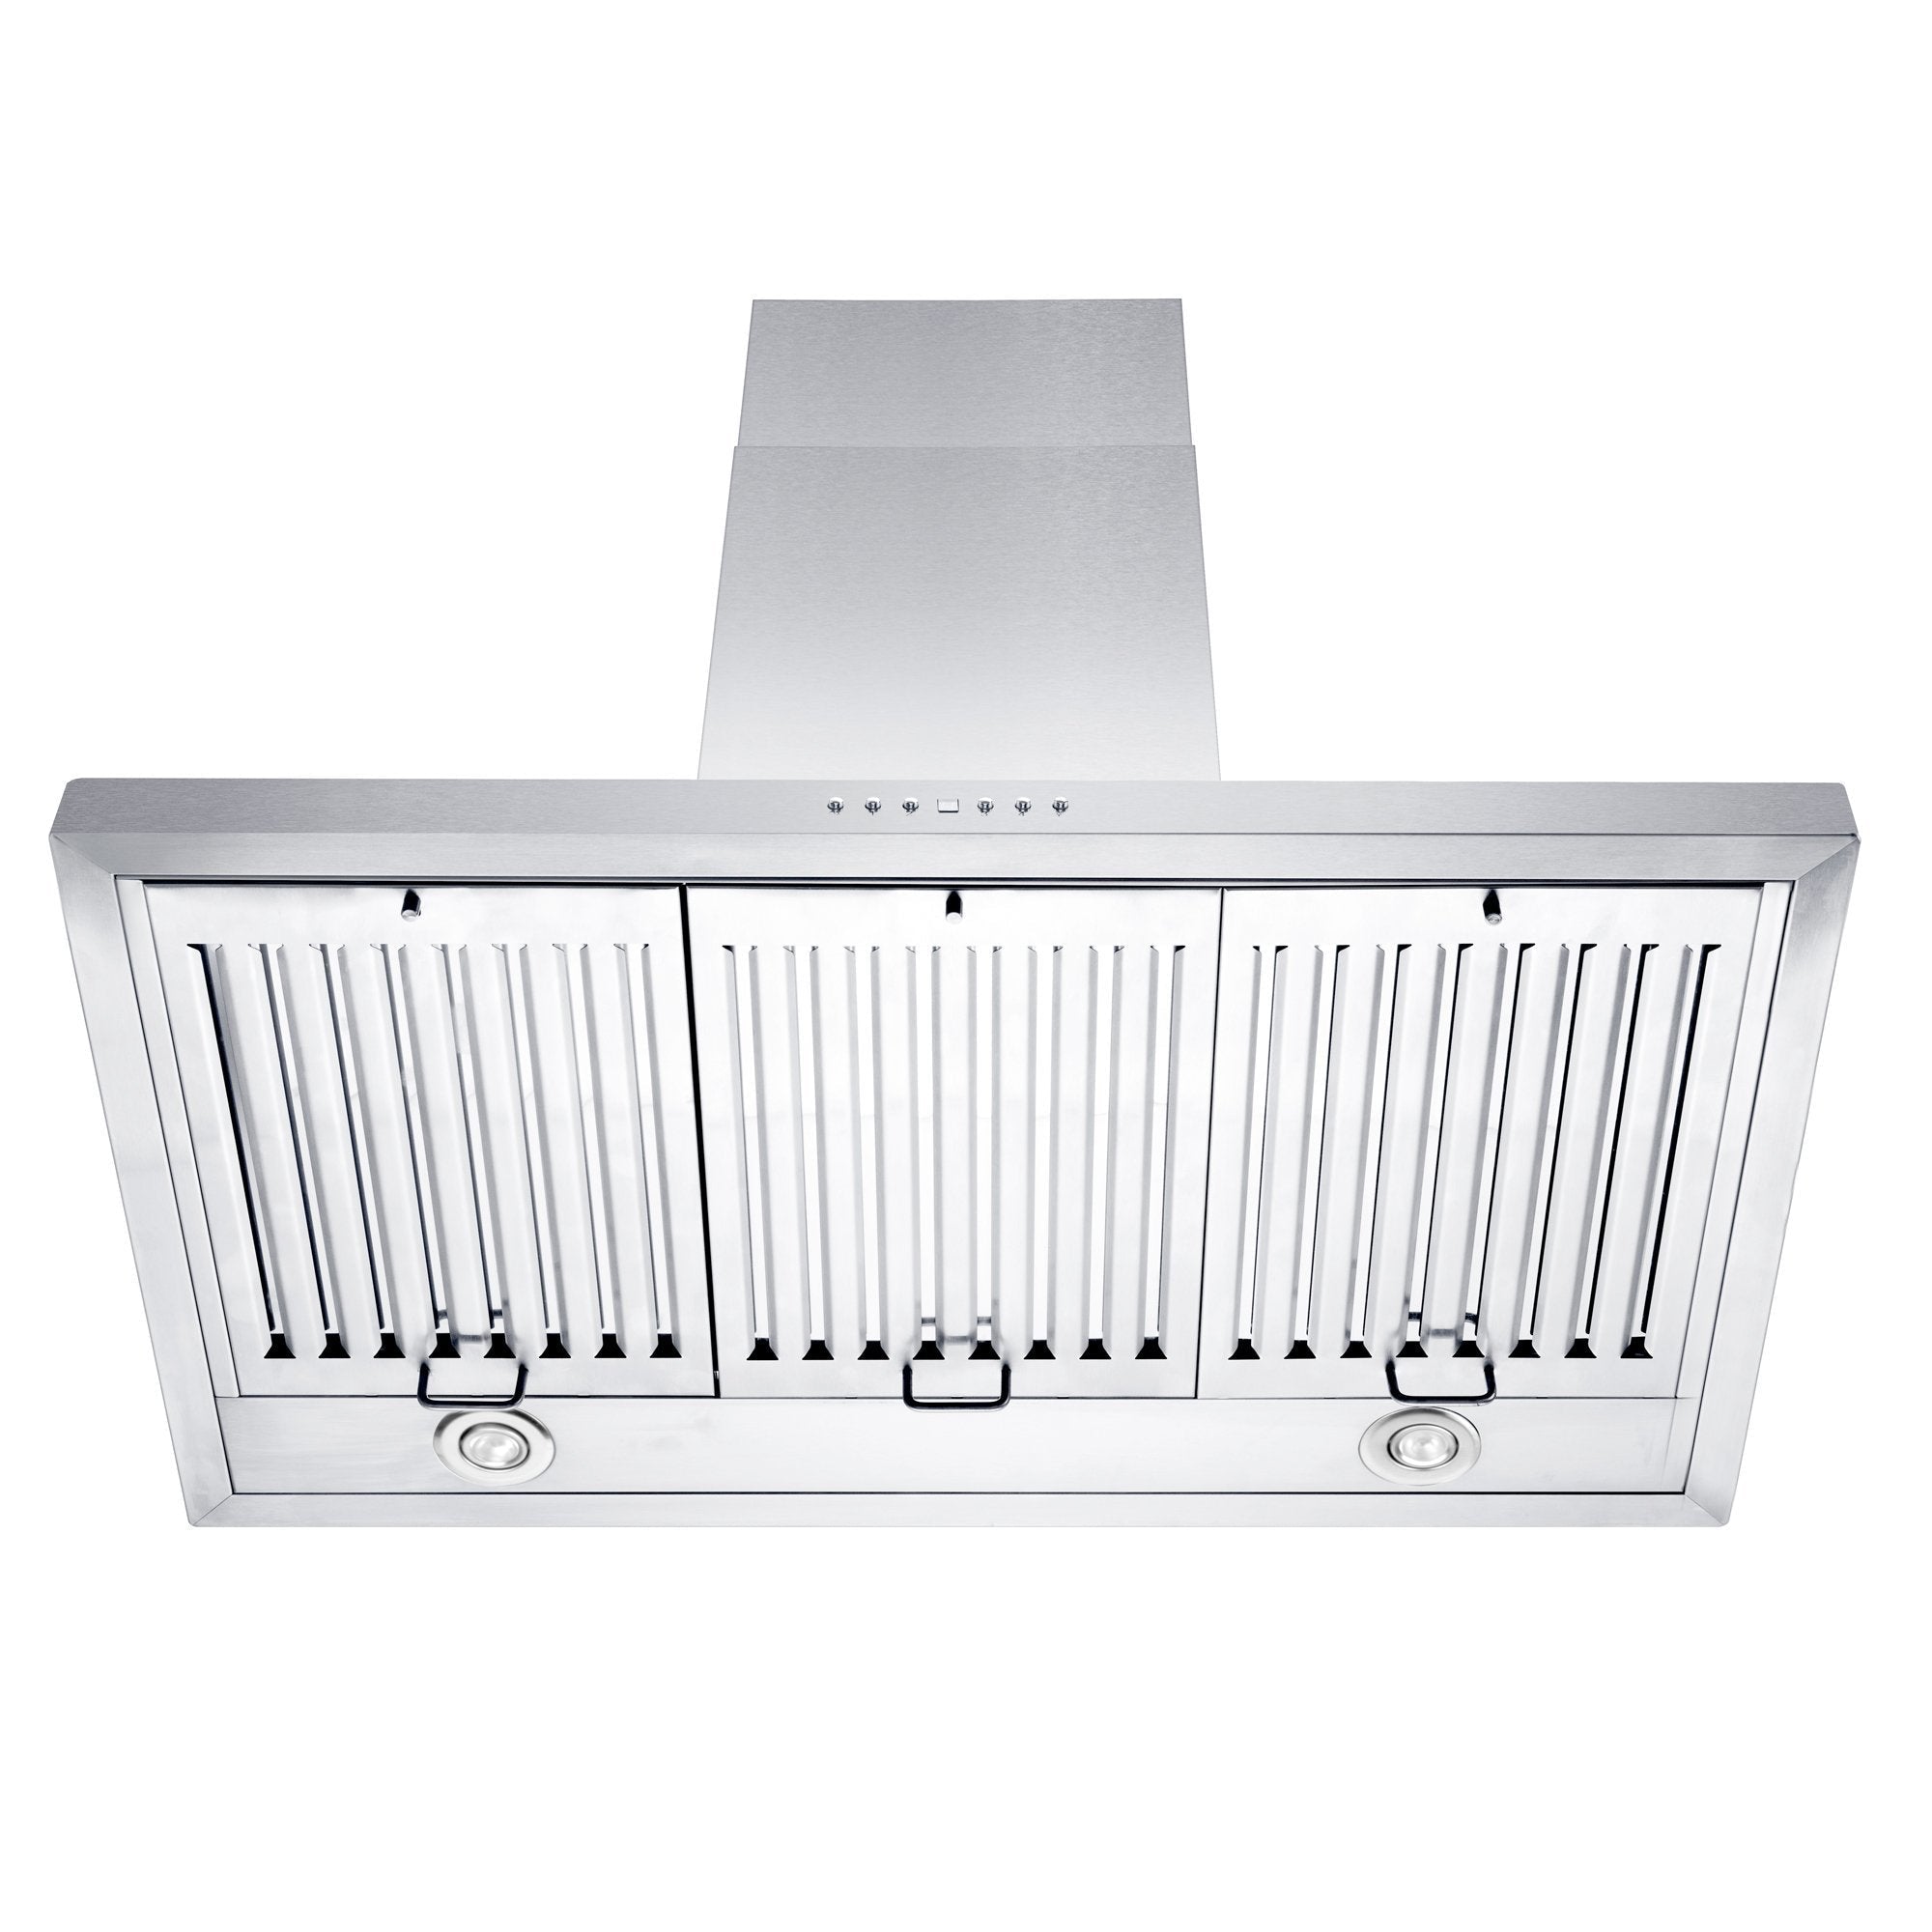 ZLINE Convertible Vent Wall Mount Range Hood in Stainless Steel (KL3) under showing baffle filters and LED lighting.